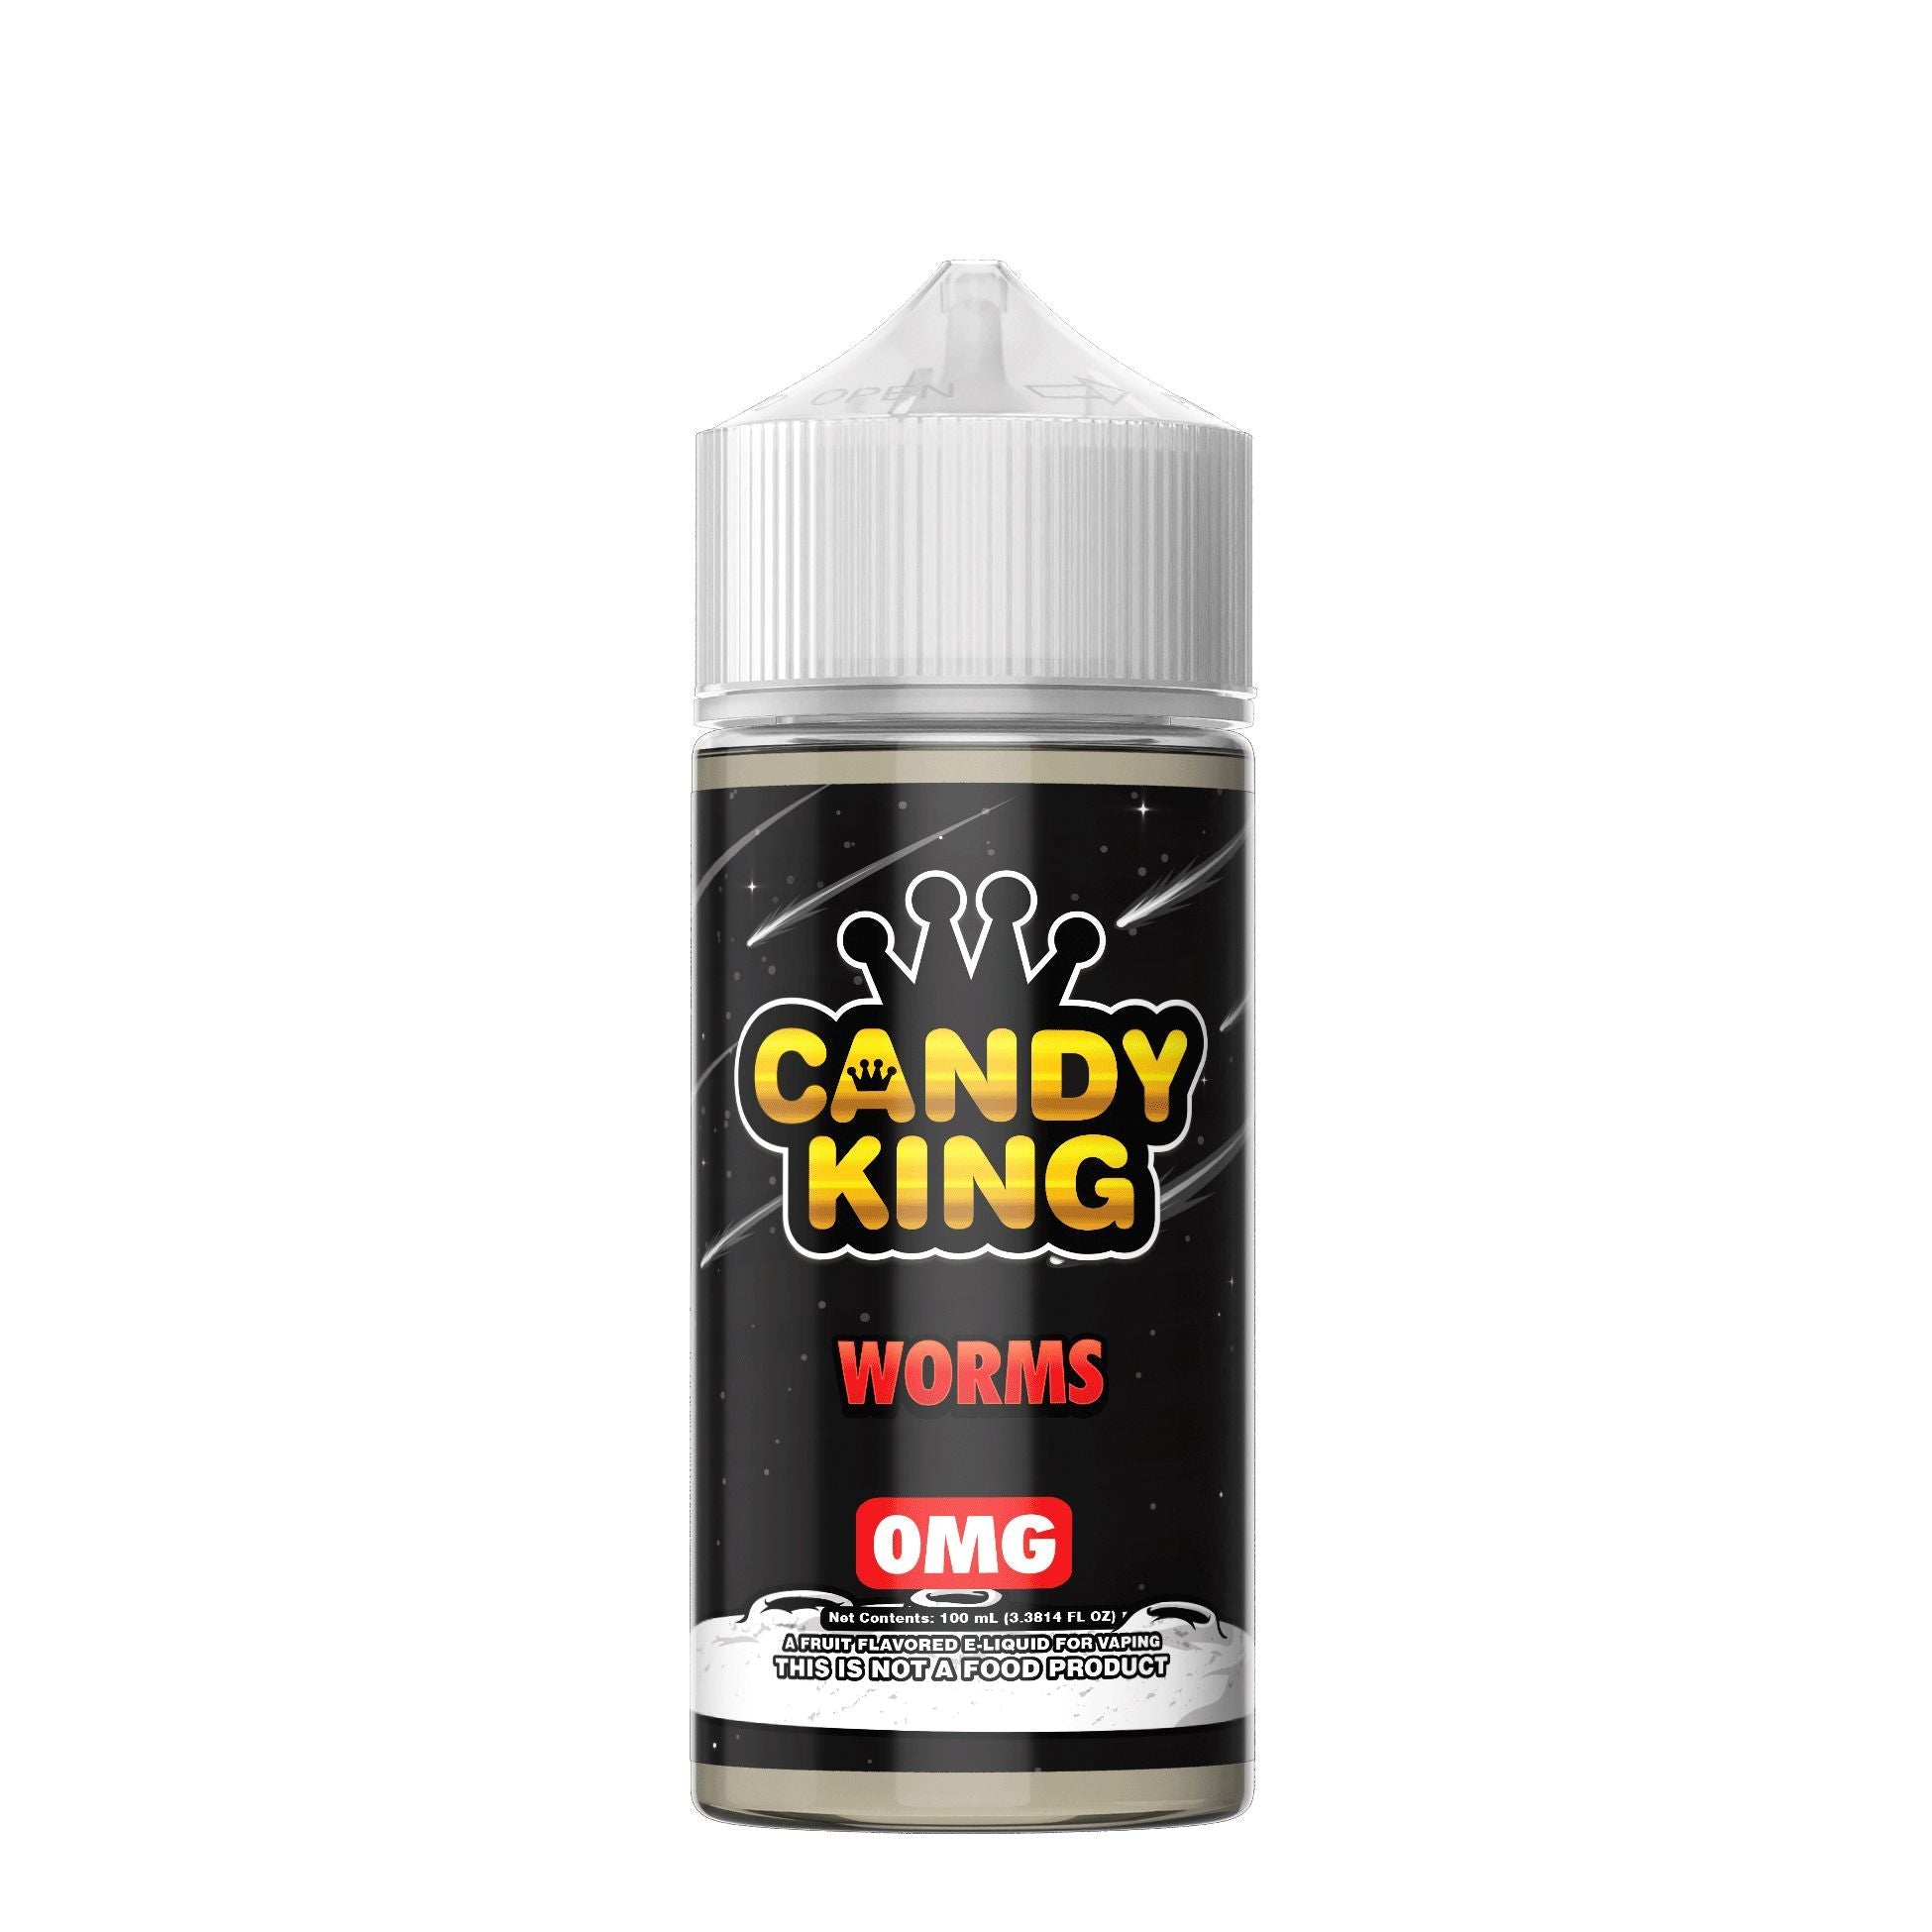 Buy Worms by Candy King - Wick And Wire Co Melbourne Vape Shop, Victoria Australia